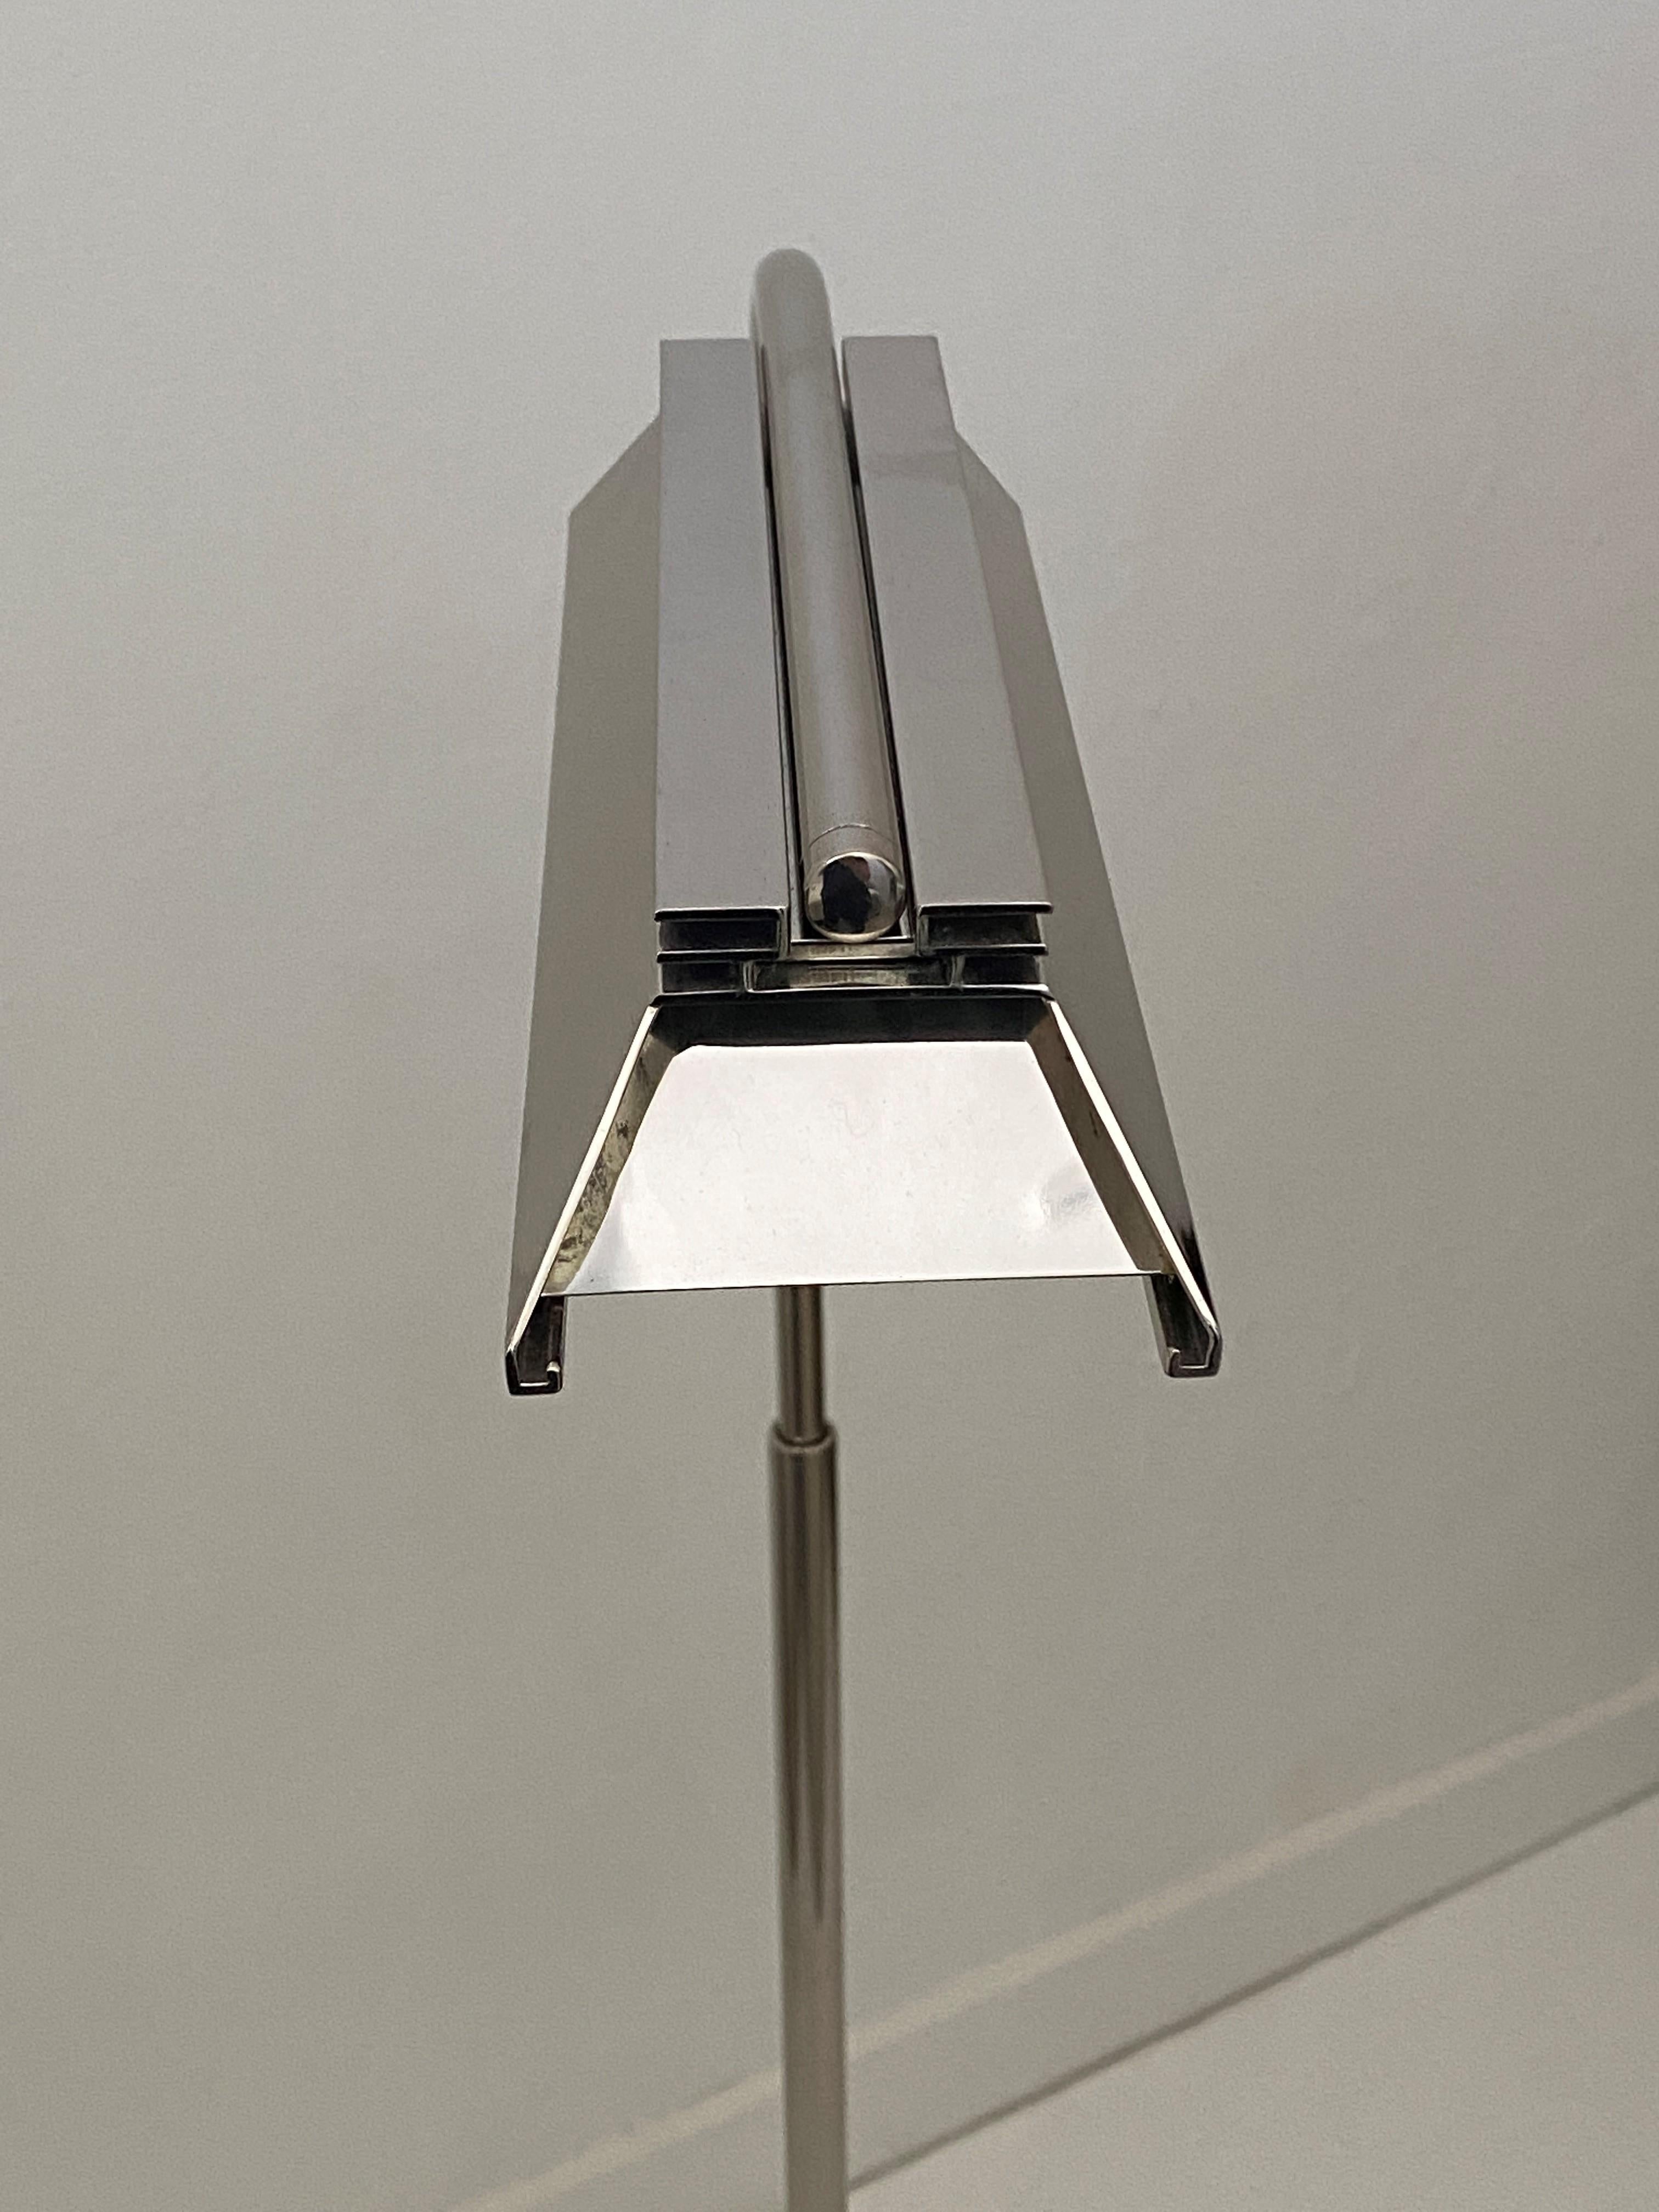 This stylish Casella lighting floor lamp has recently been replated in a polished nickel finish (06/2020).